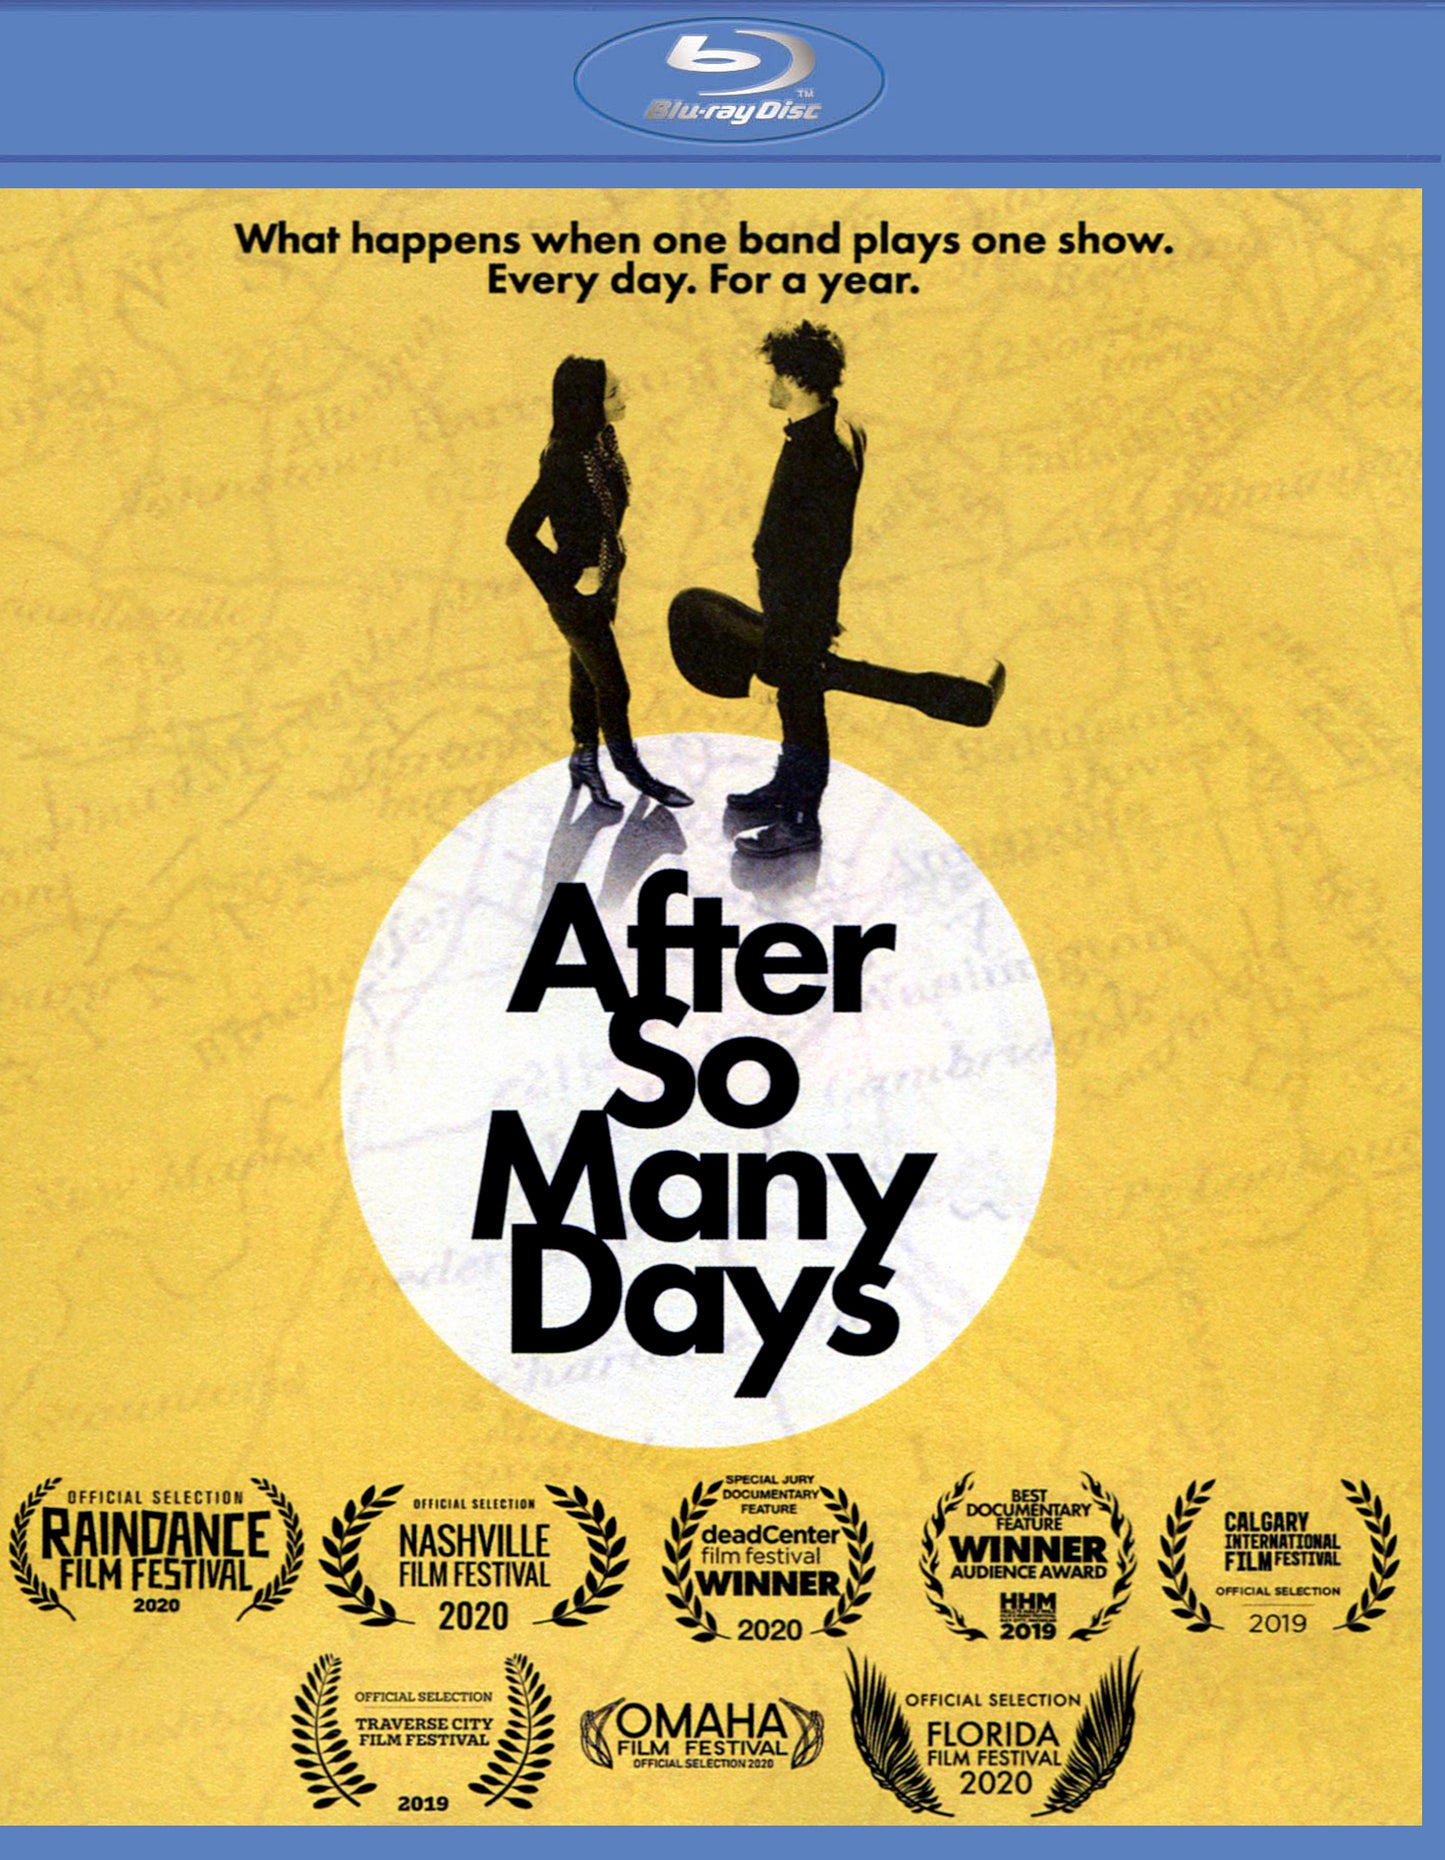 After So Many Days [Blu-ray] cover art